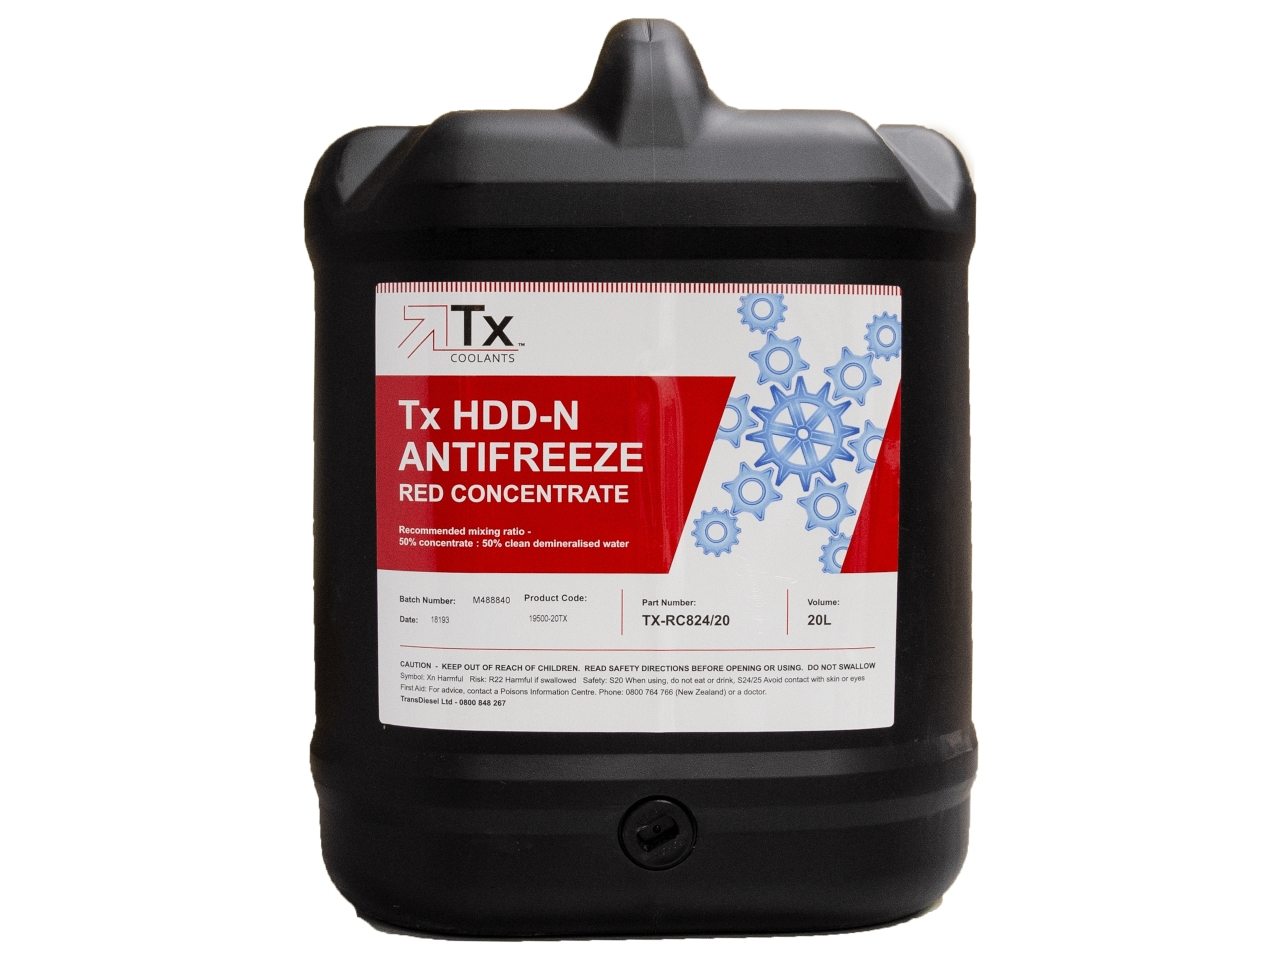 Tx HDD-N Antifreeze Red Concentrate 20L